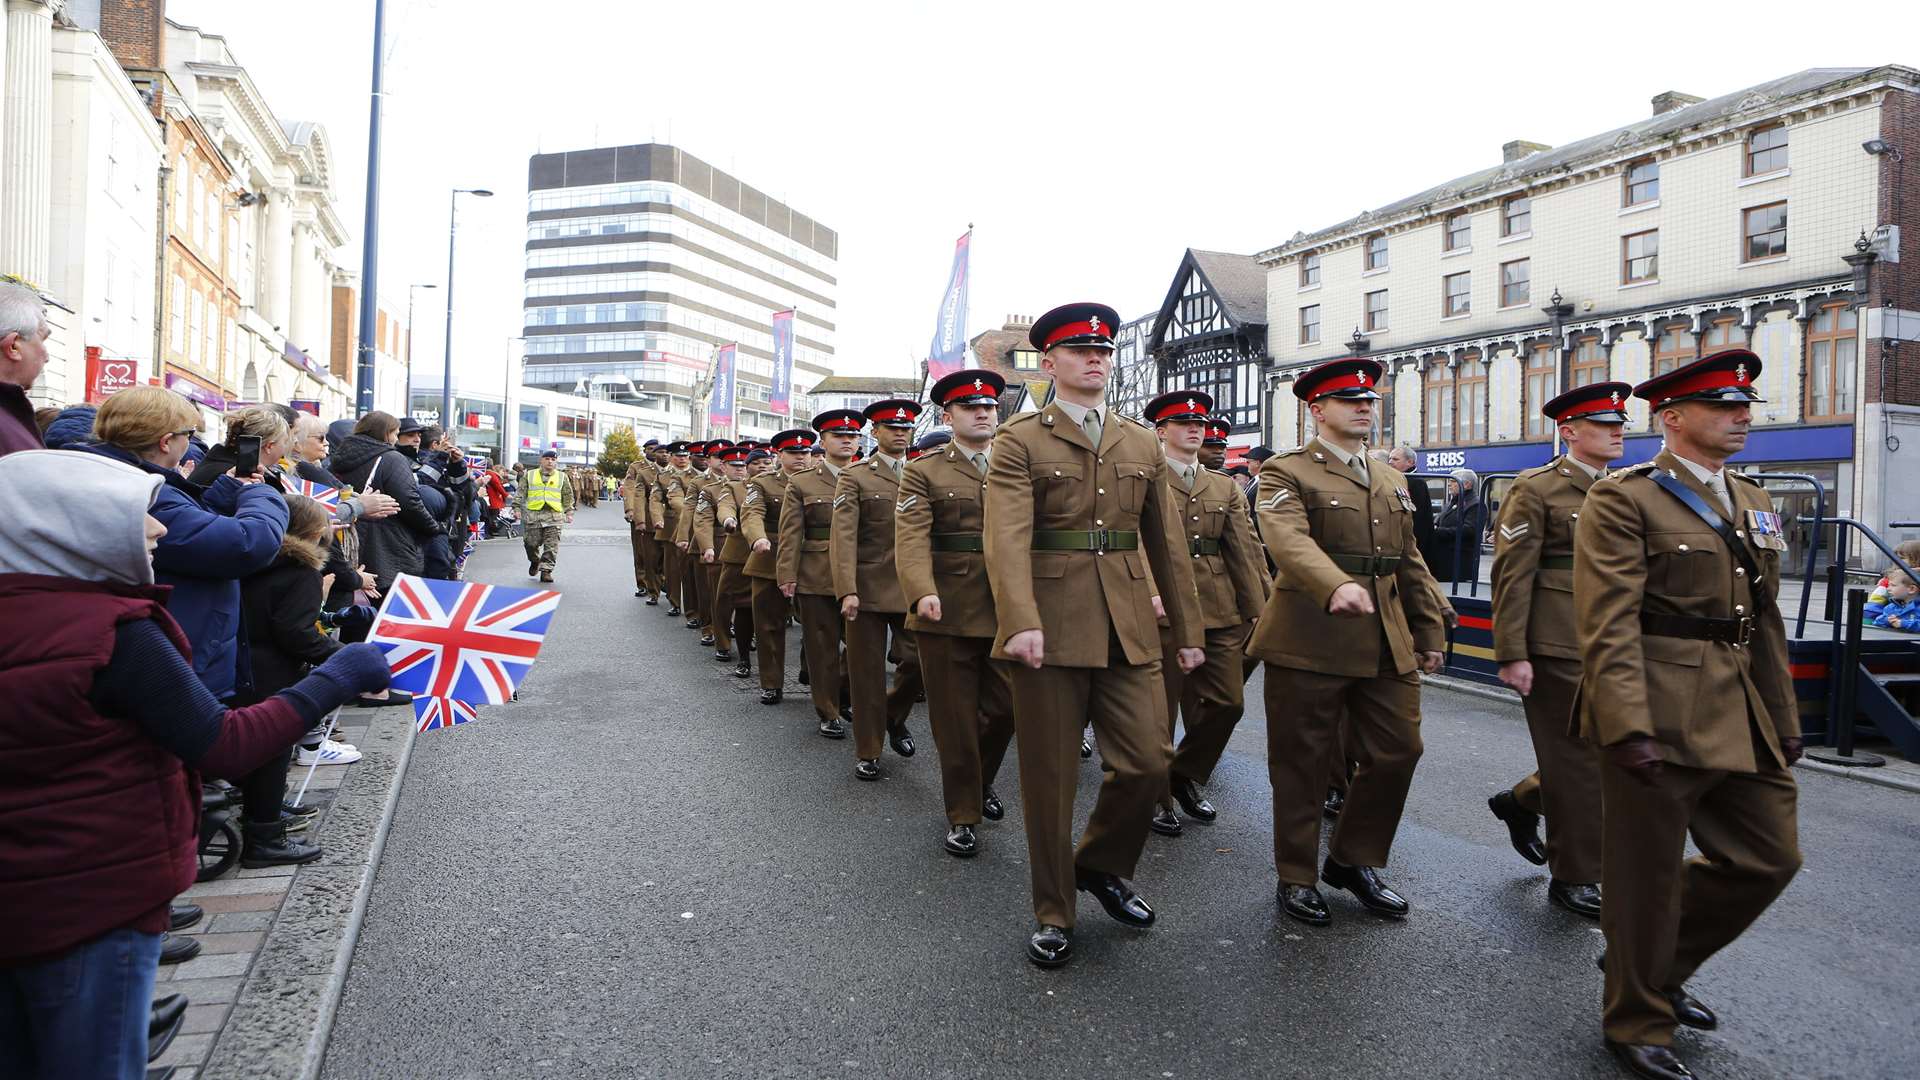 The Remembrance parade passes Maidstone Town Hall